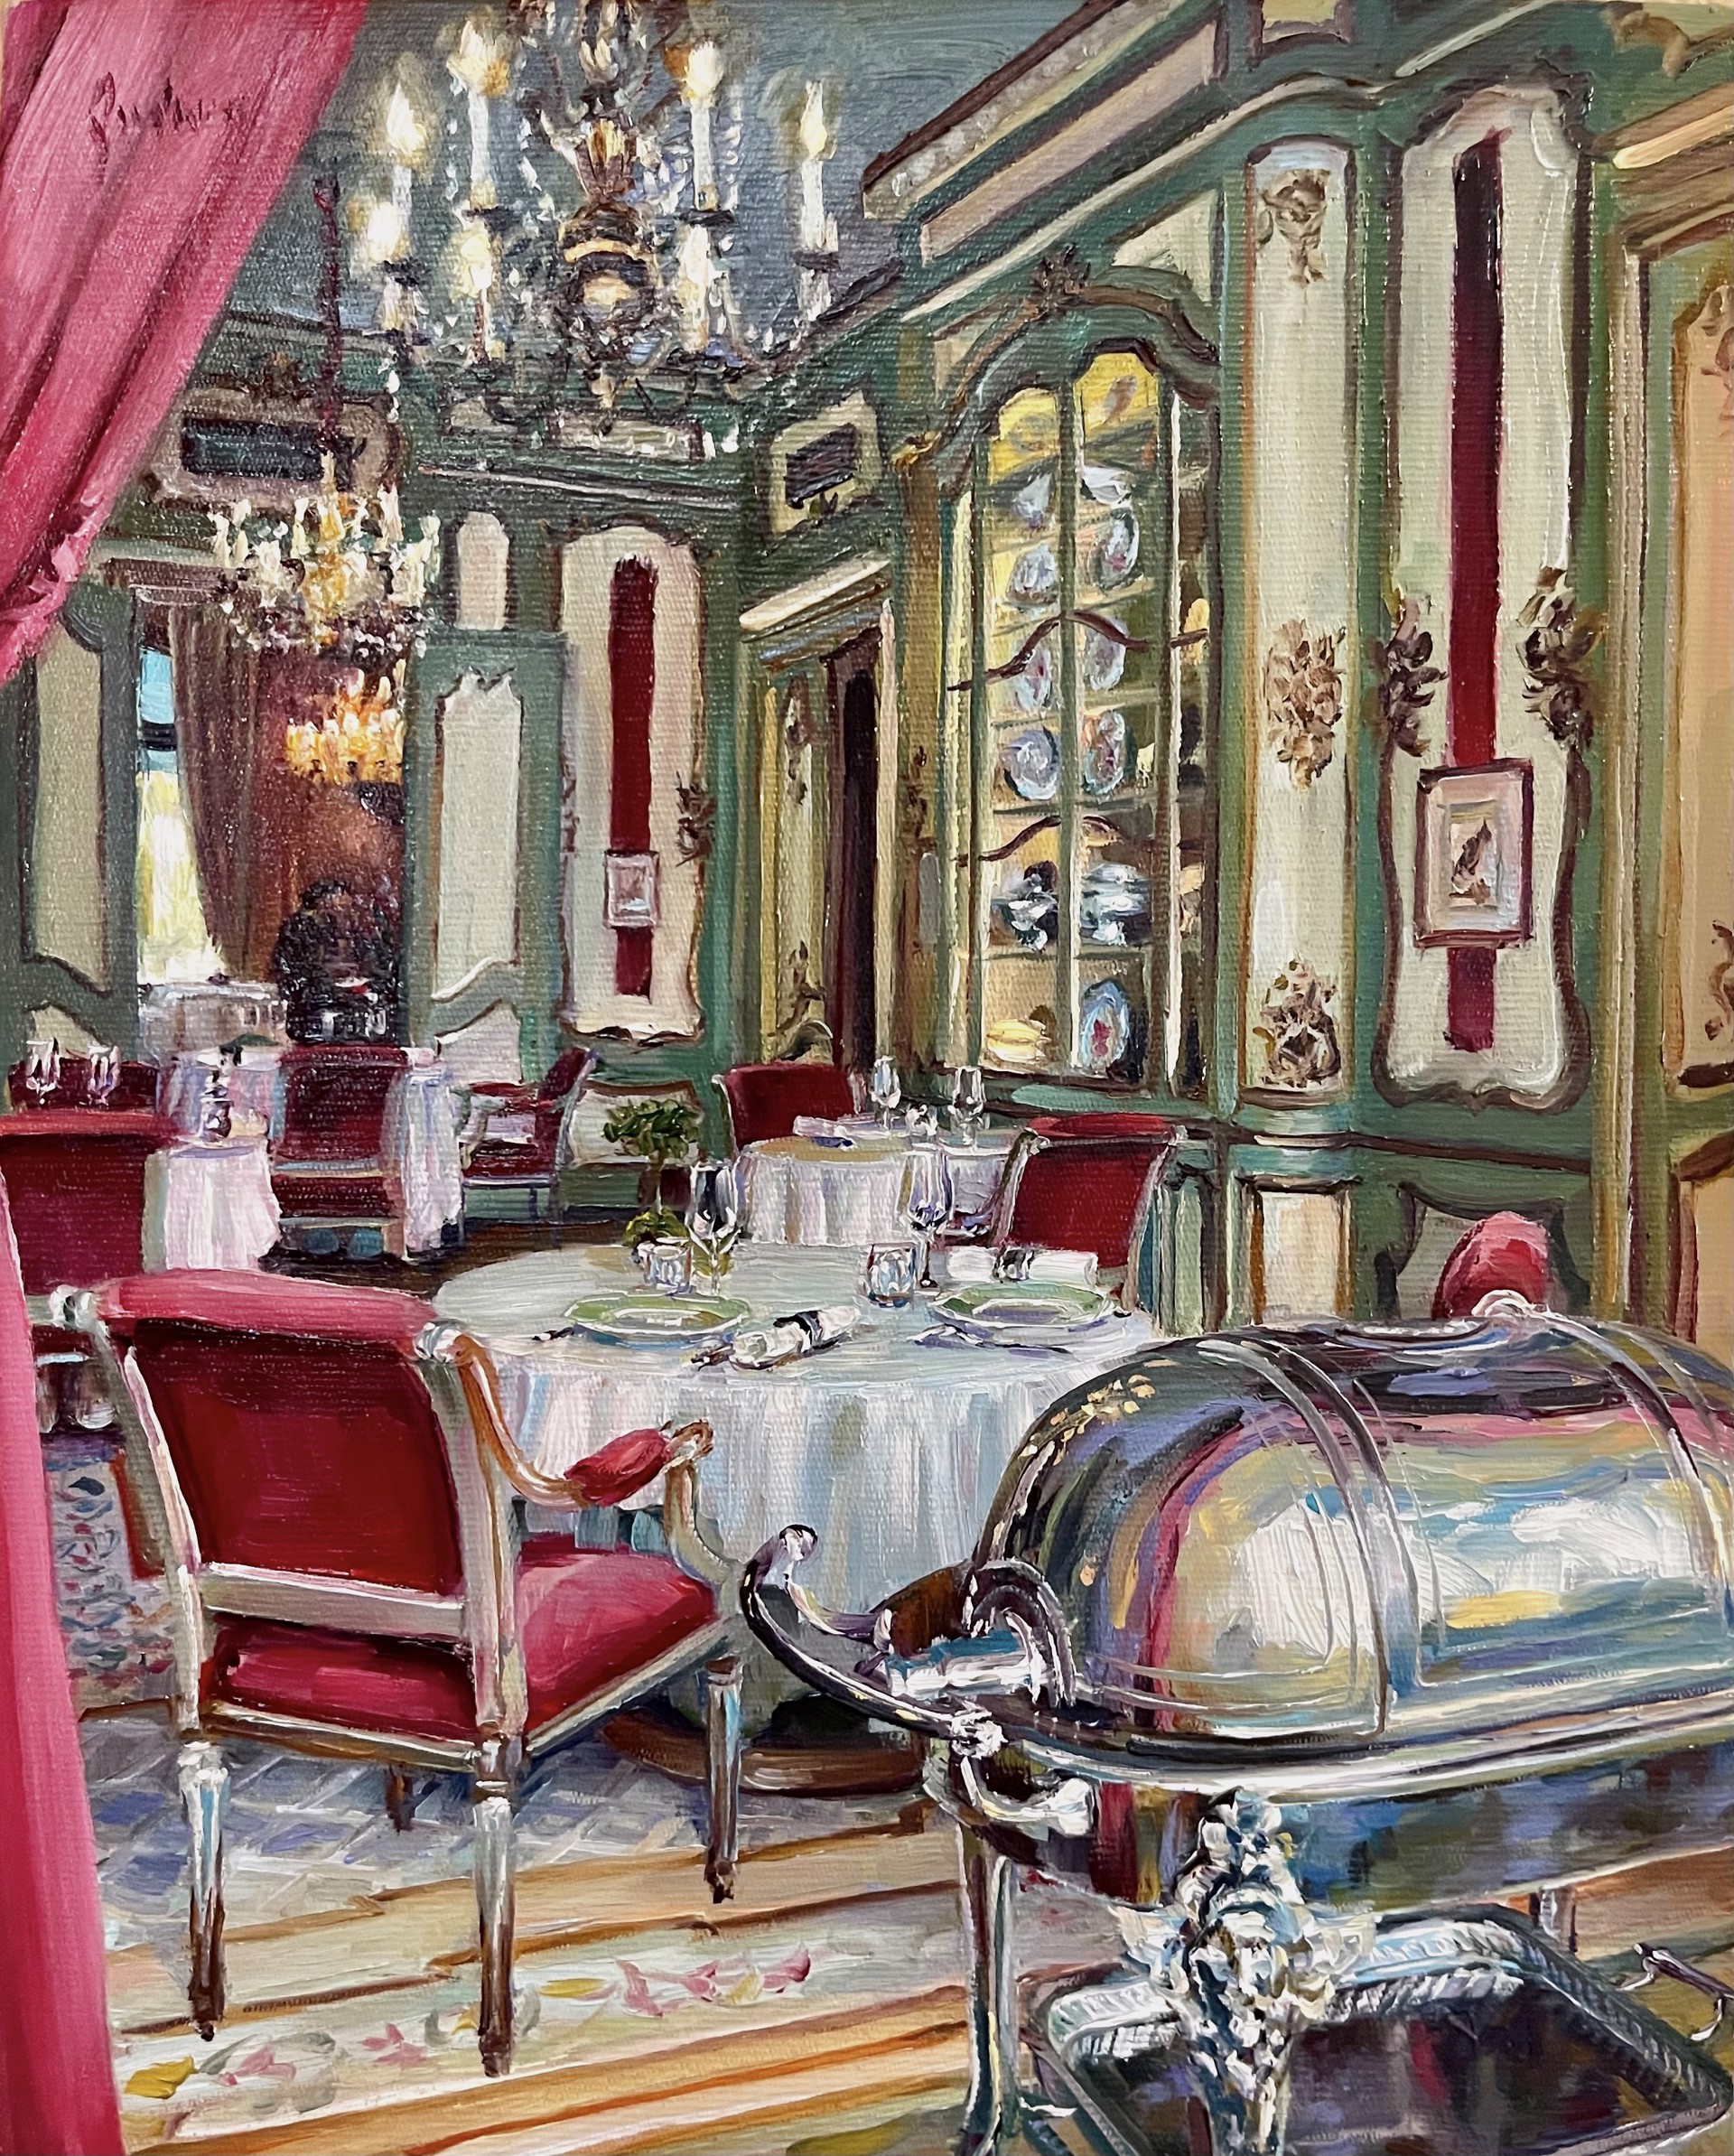 Silver Service Cart at Le Clarence, Paris by Lindsay Goodwin